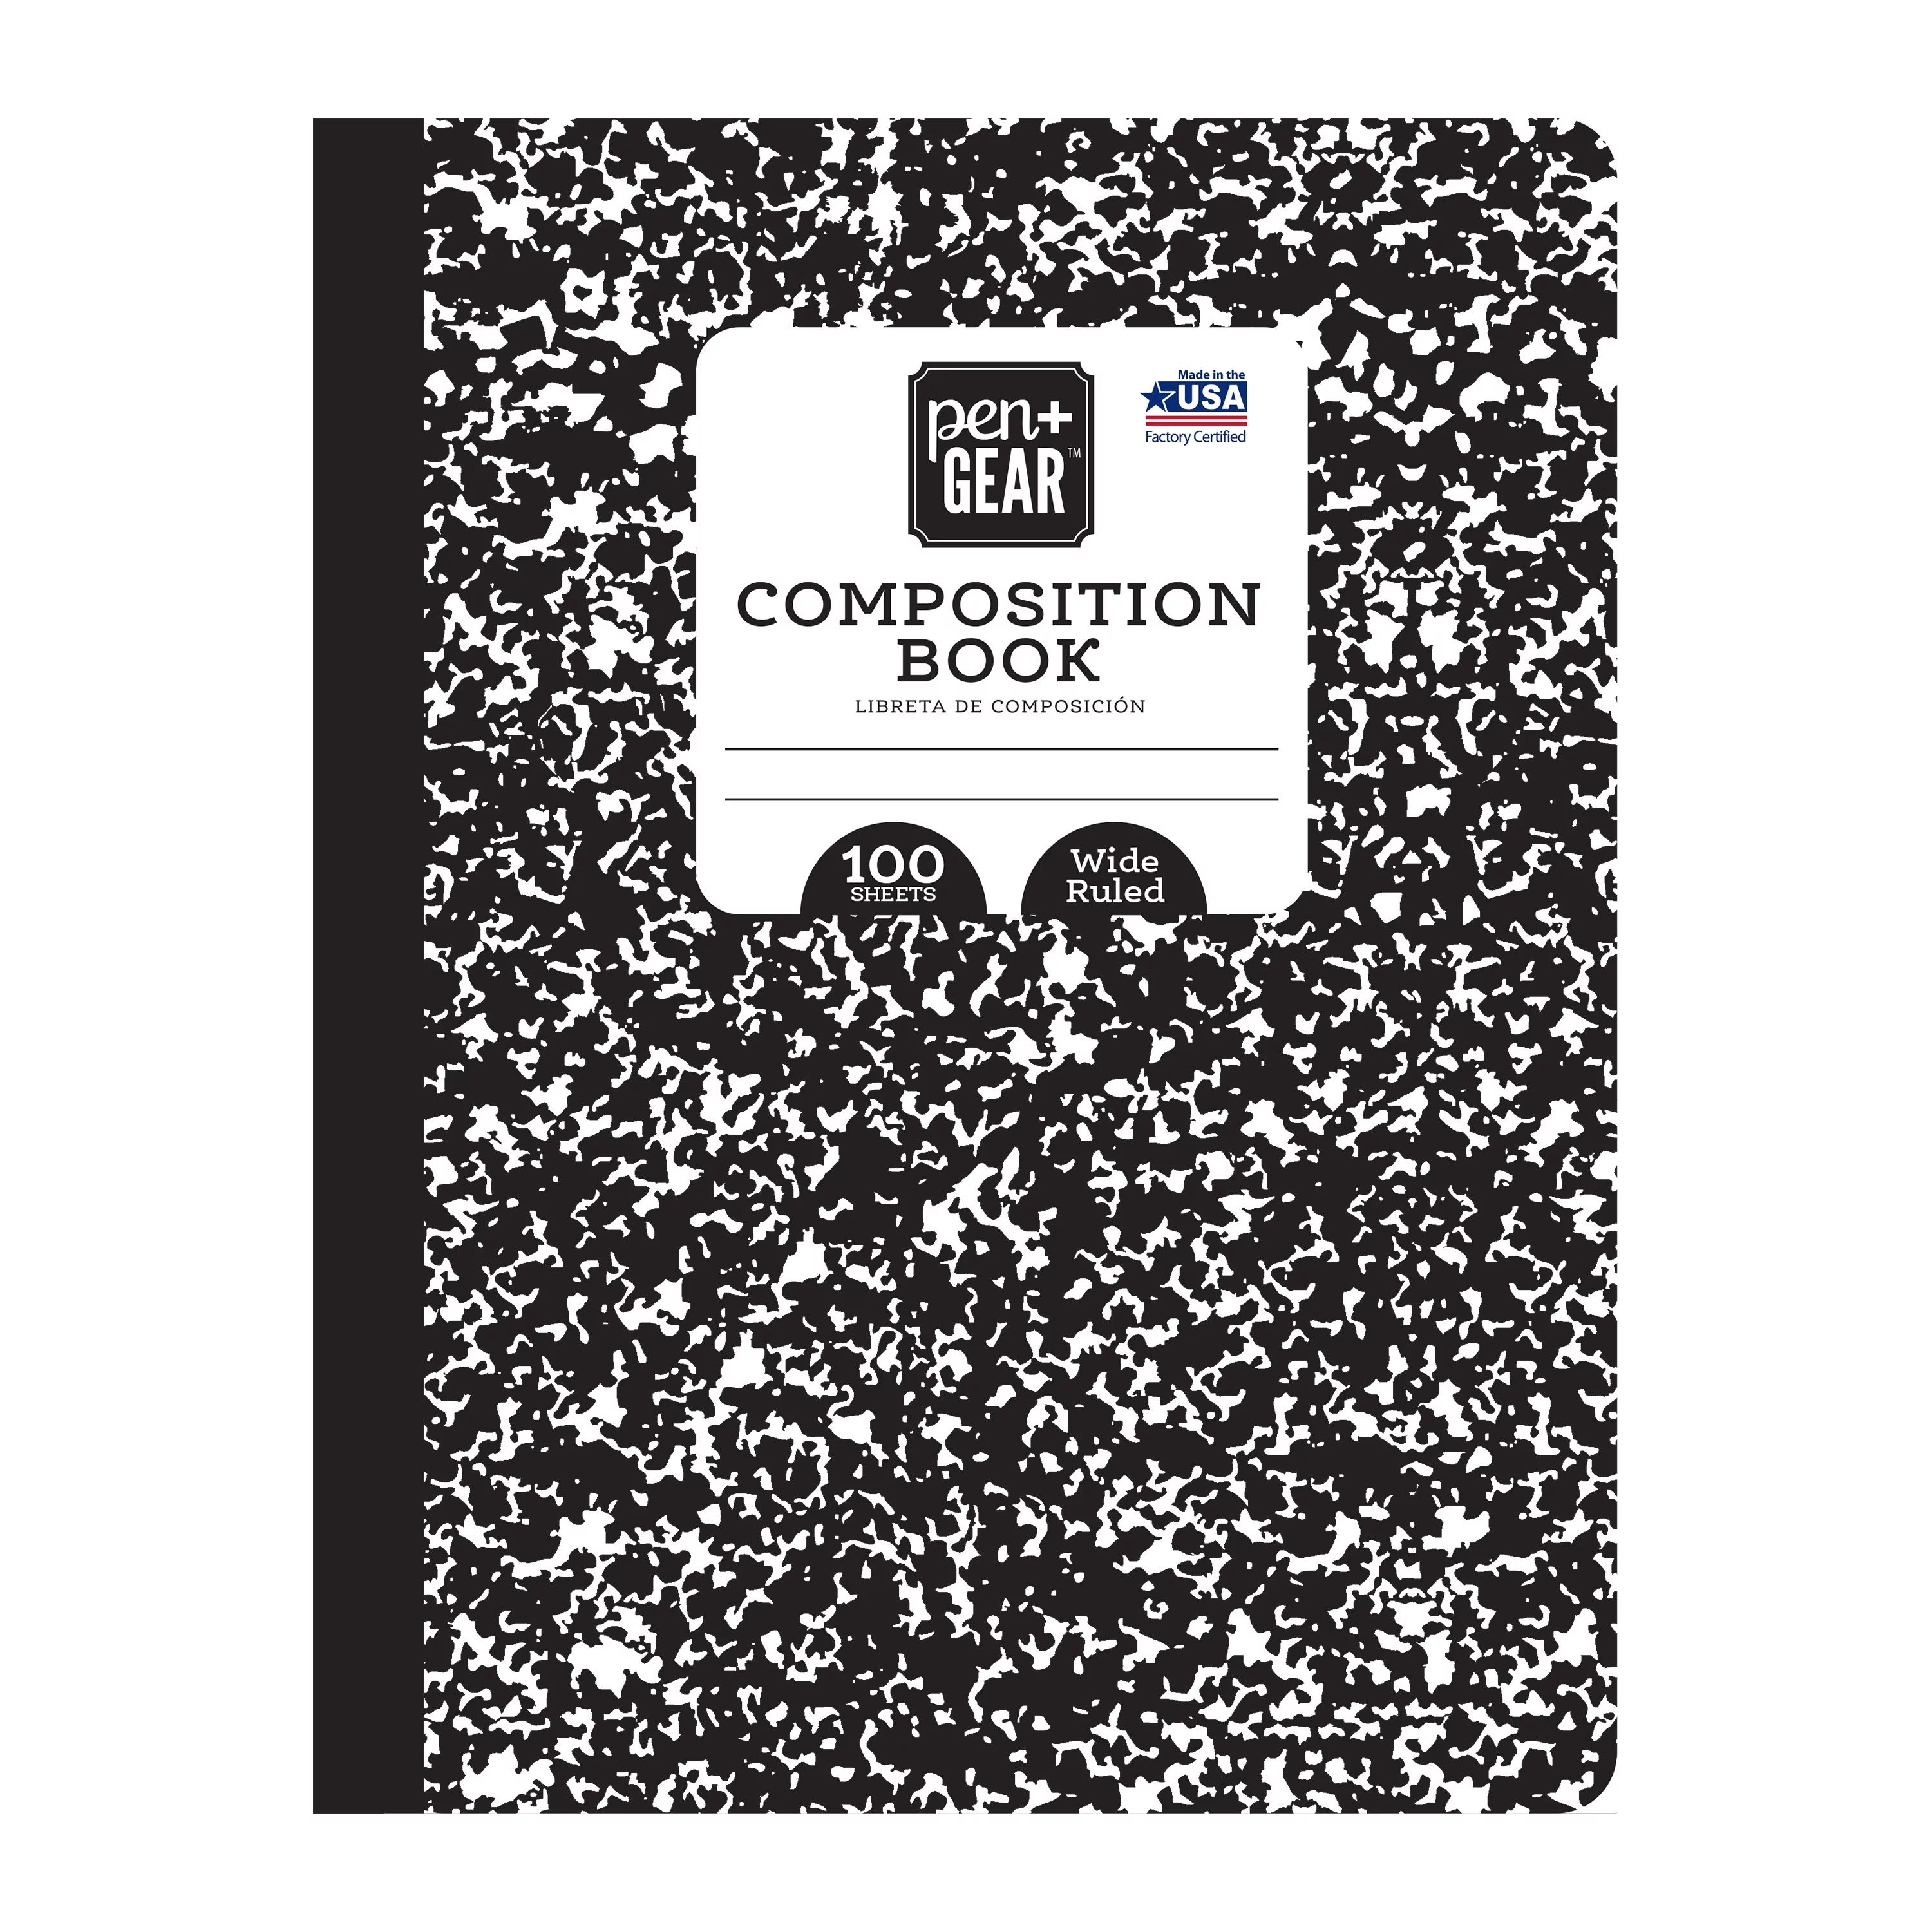 Pen + Gear Composition Book, Wide Ruled, 100 Pages, 9.75" x 7.5"x 0.25" | Walmart (US)